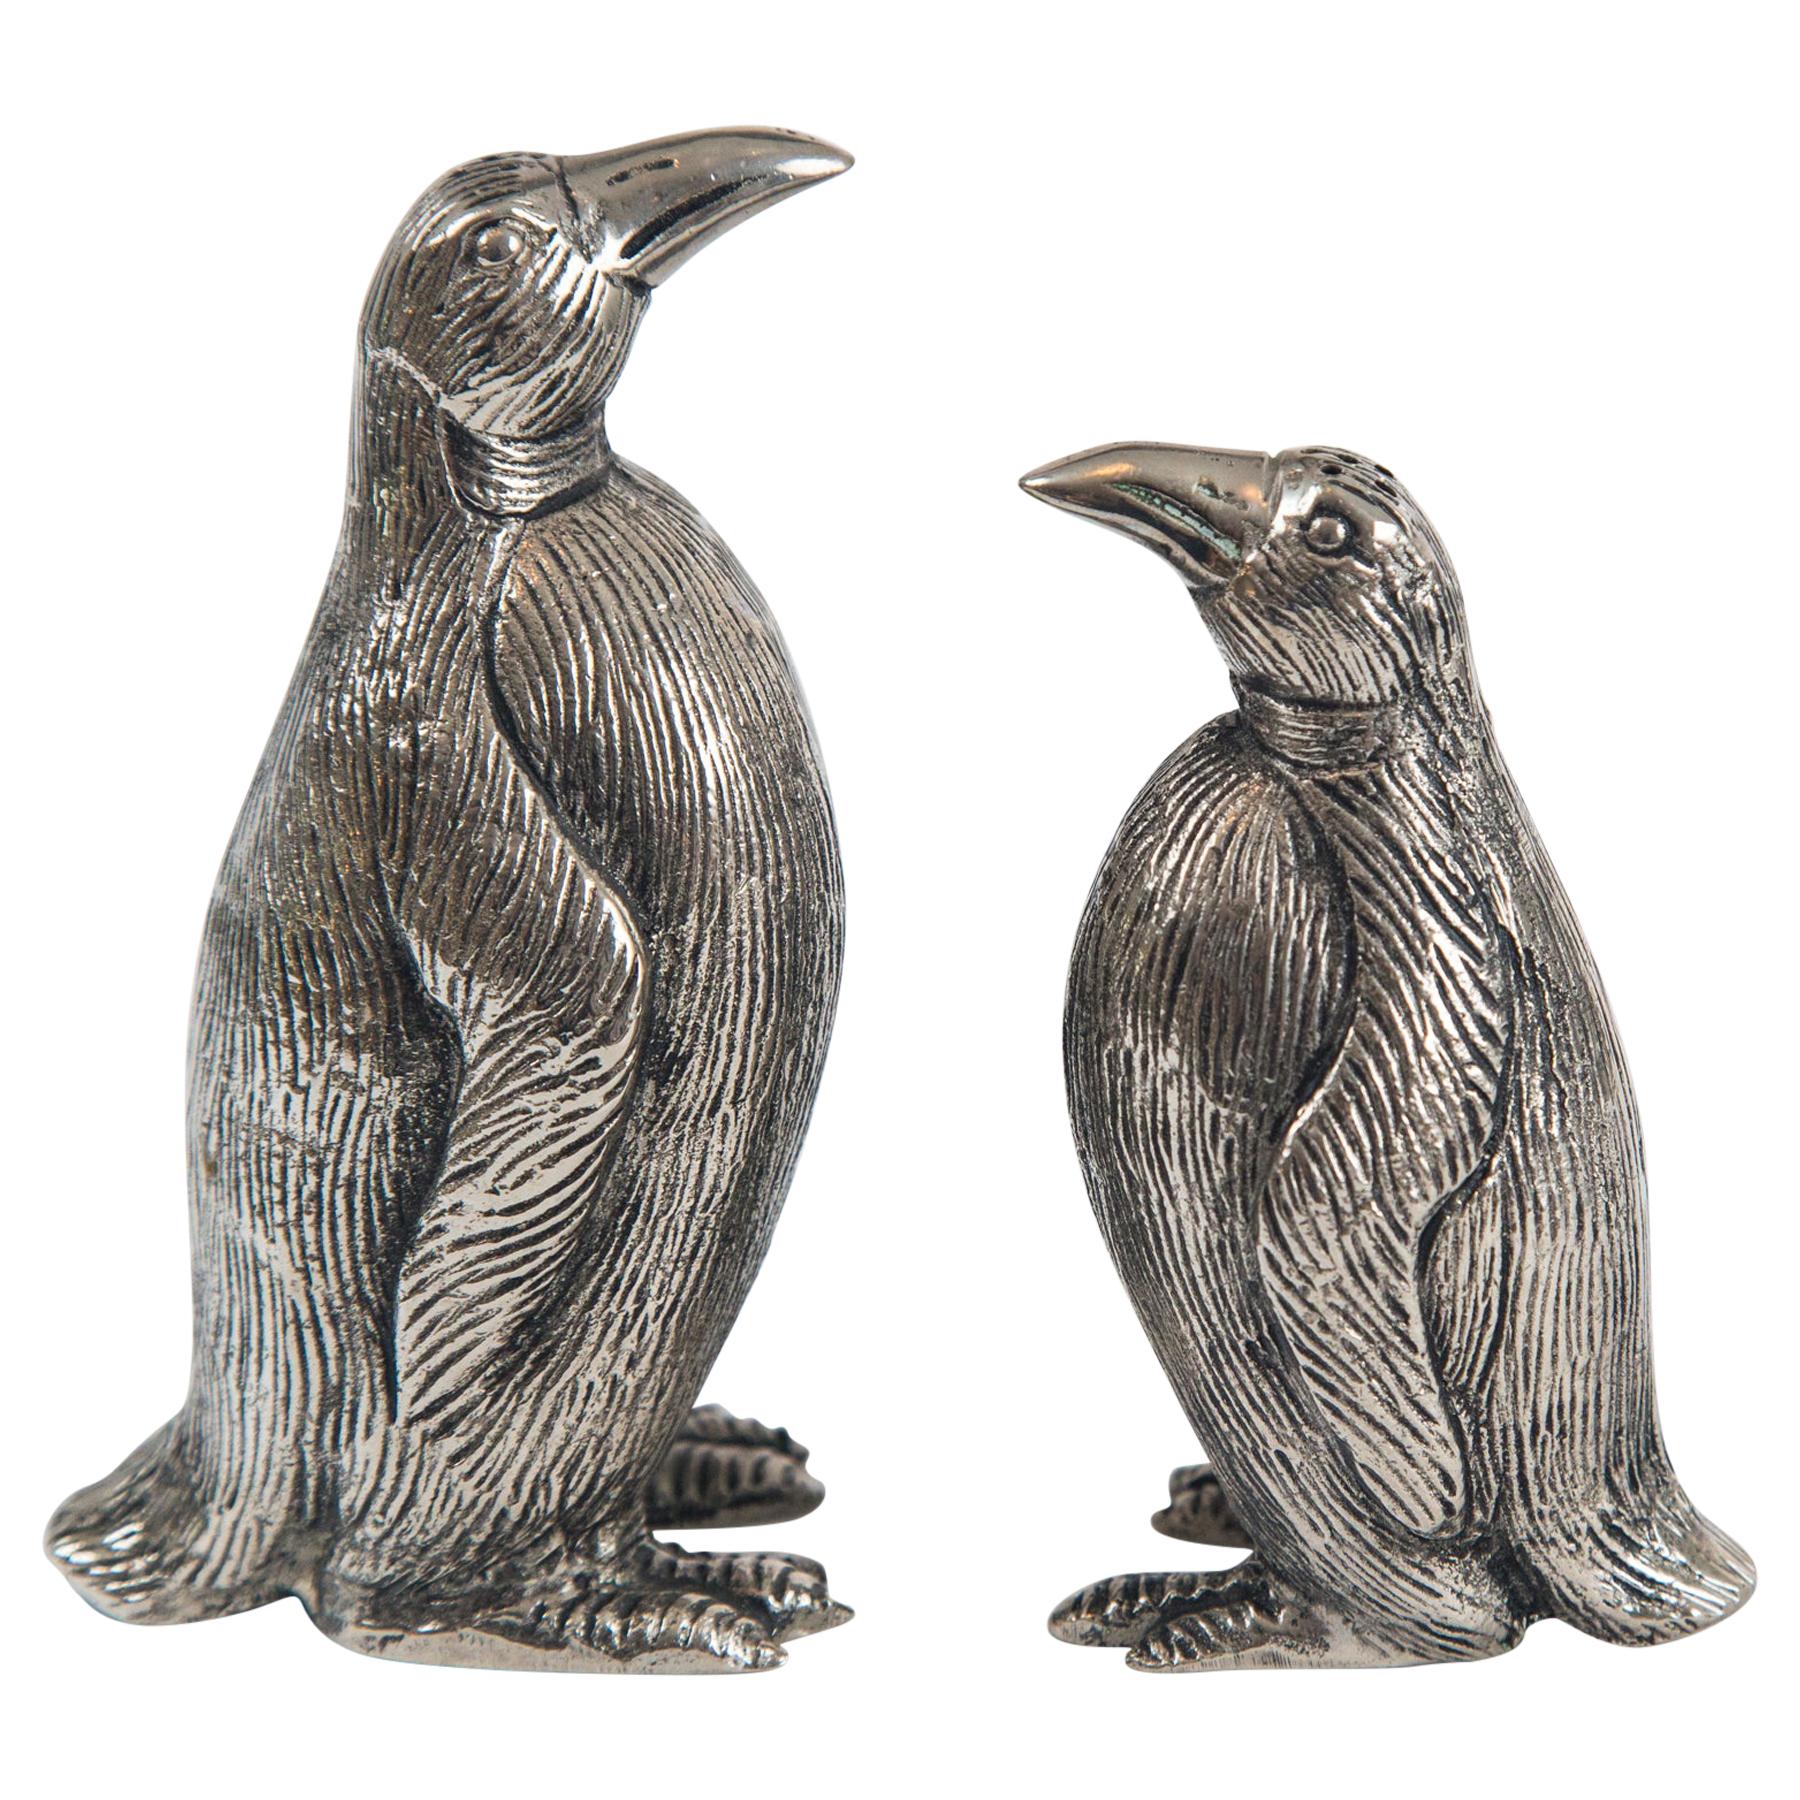 Gucci Penguin Salt and Pepper Shakers, Silver Plate Over Pewter